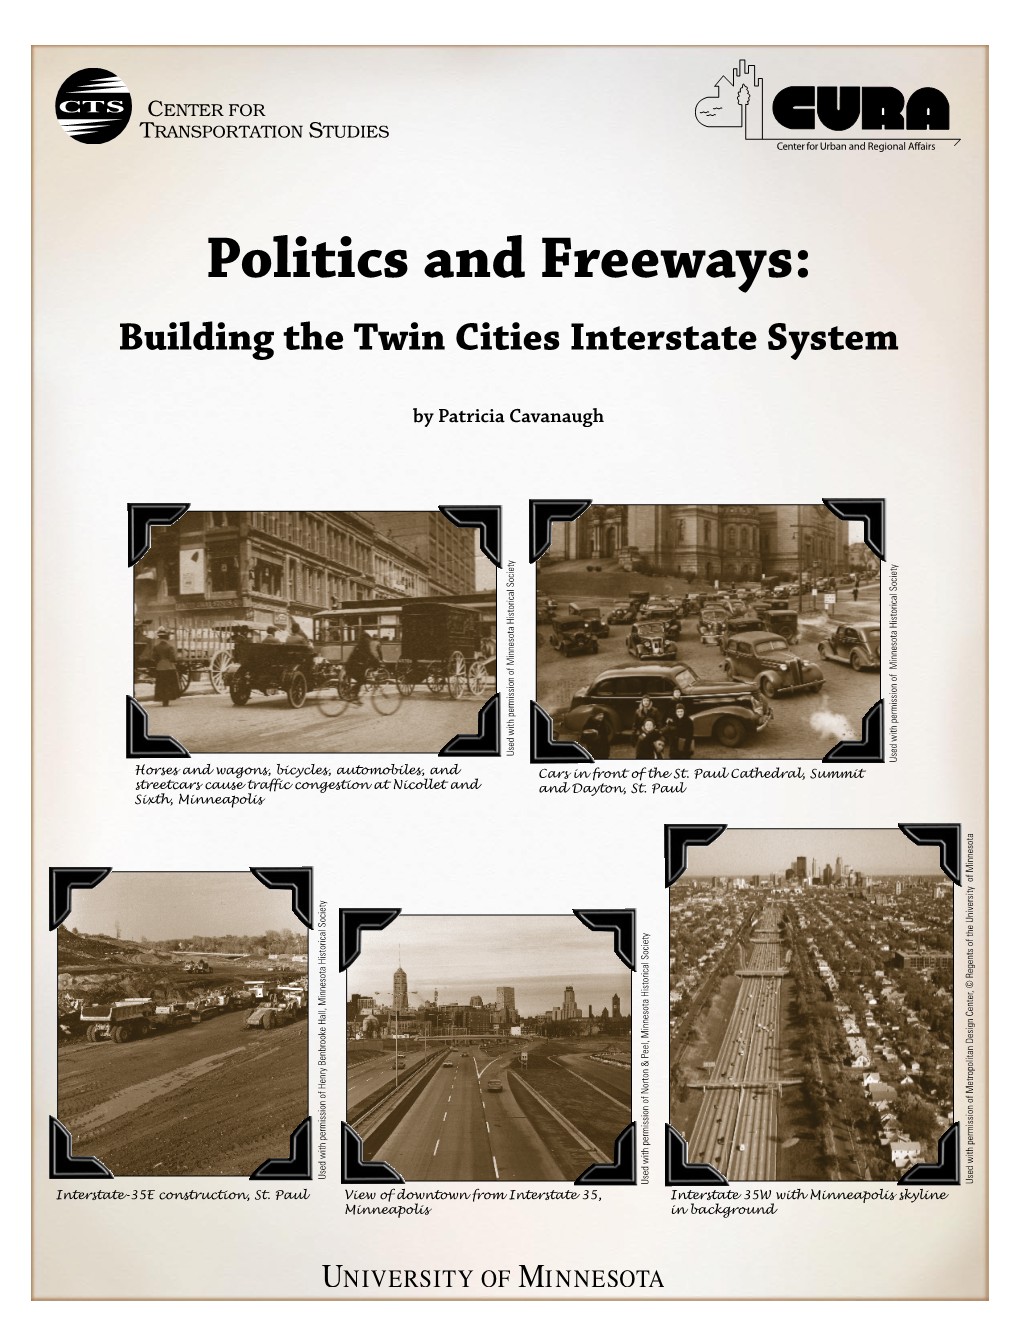 Politics and Freeways: Building the Twin Cities Interstate System